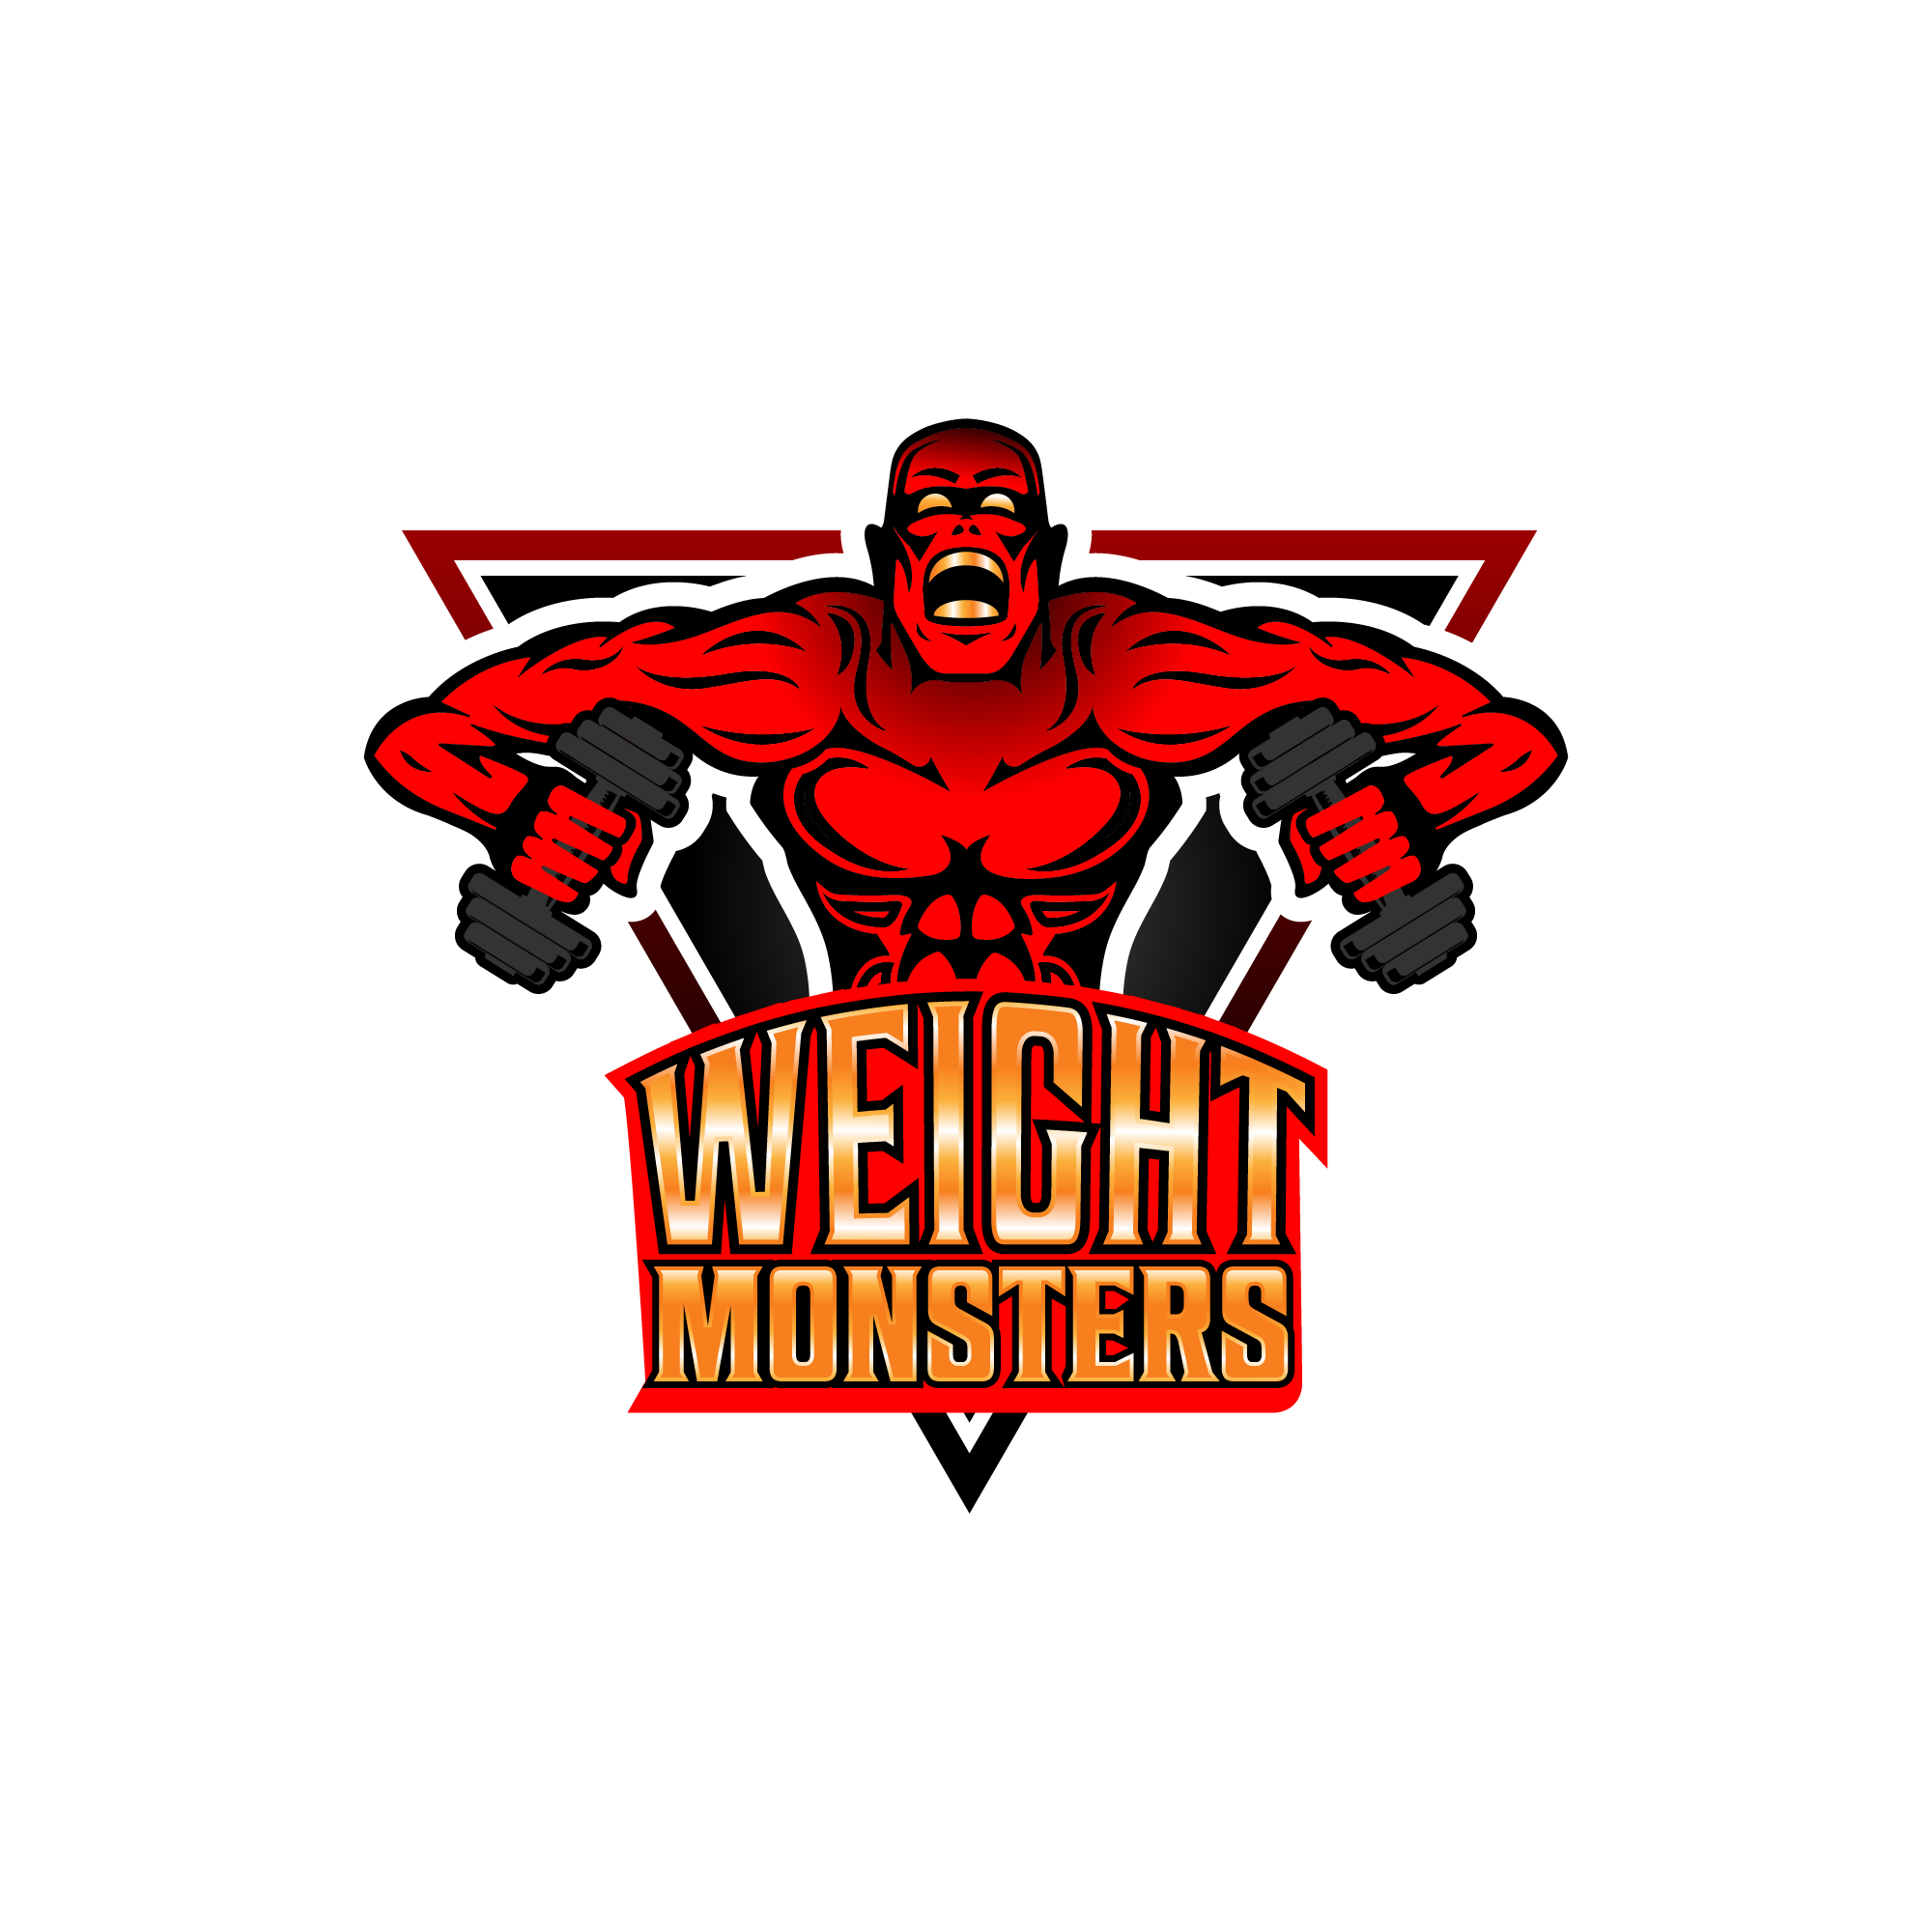 Weight Monsters "Logo'